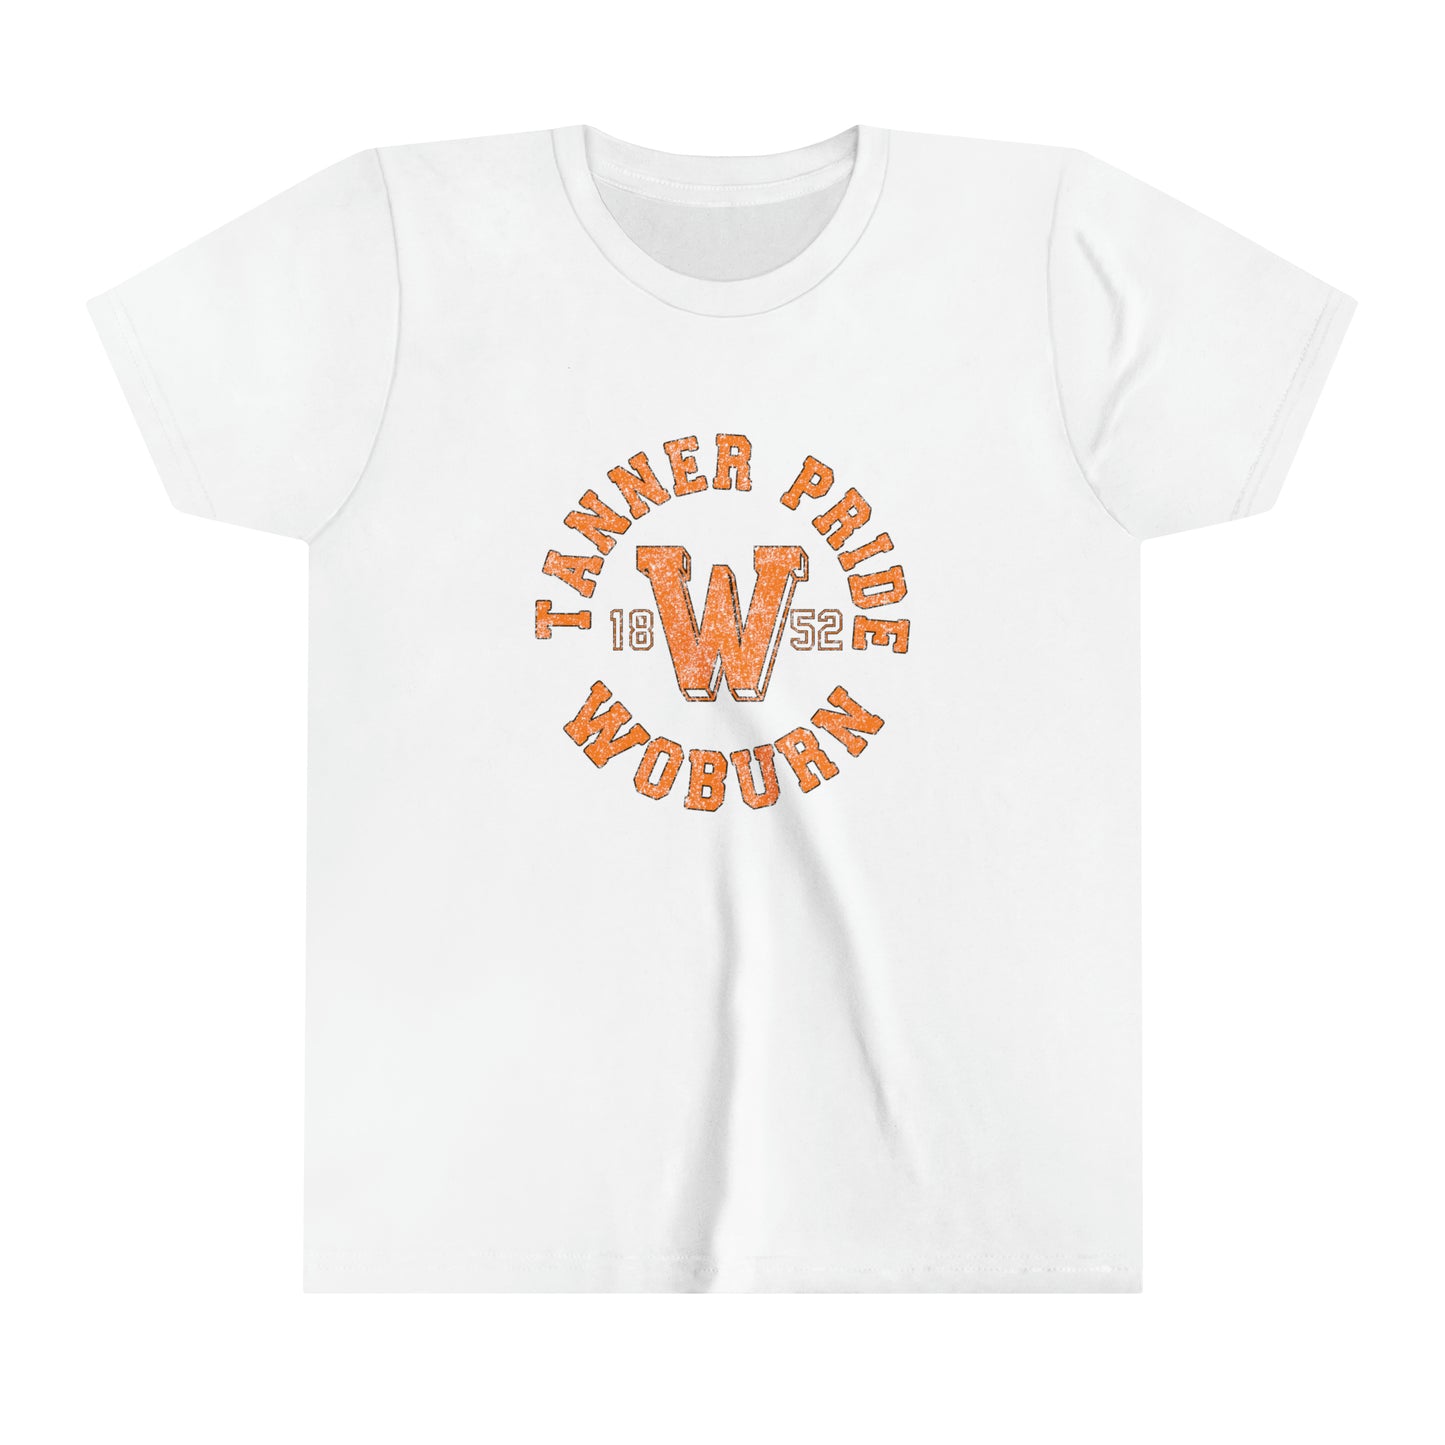 Tanners Pride Youth Tee